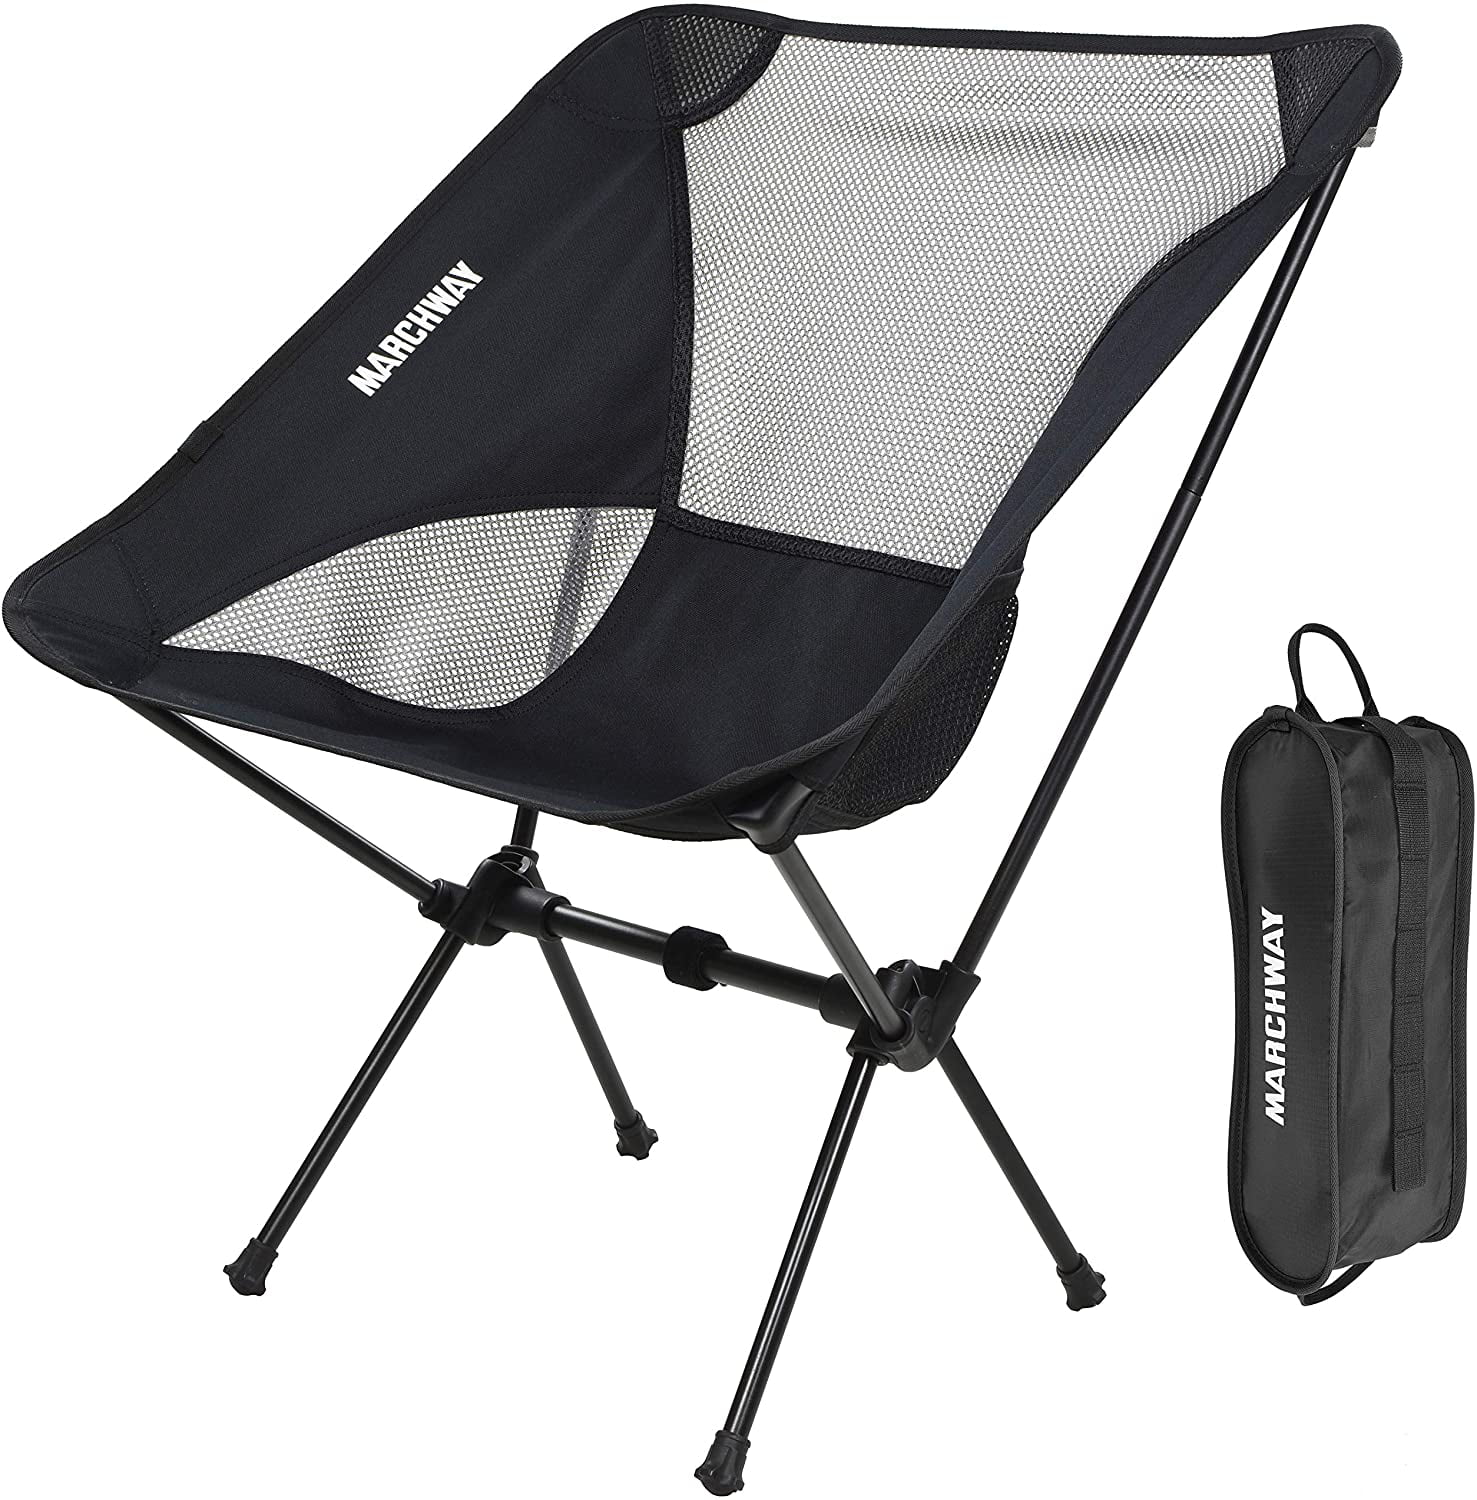 Portable Outdoor Lightweight Folding Camping Chair Backpacking Hiking Picnic